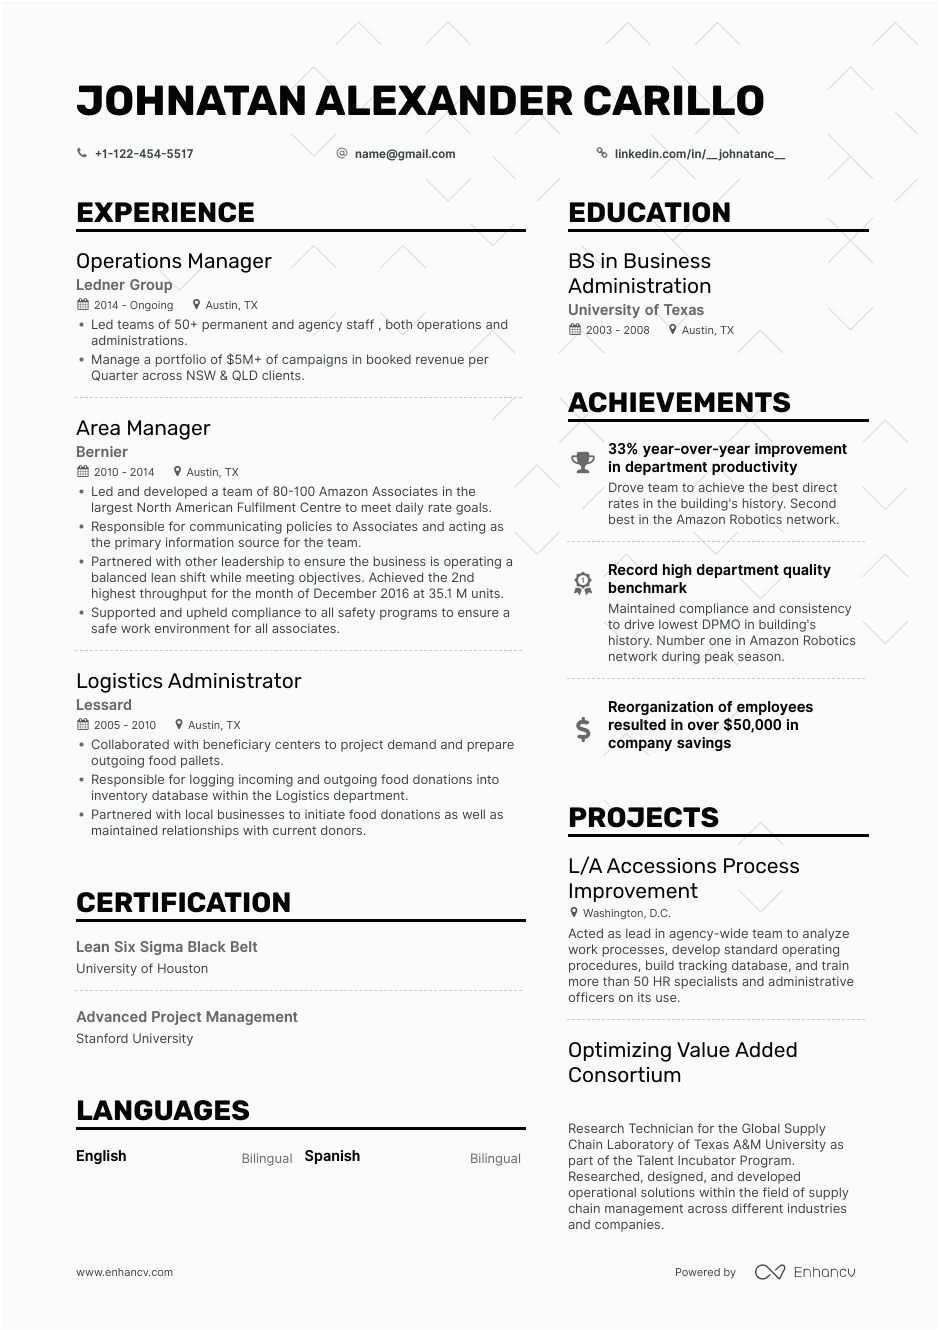 Resume Summary Sample for Operations Manager Operations Manager Resume 8 Step Ultimate Guide for 2020